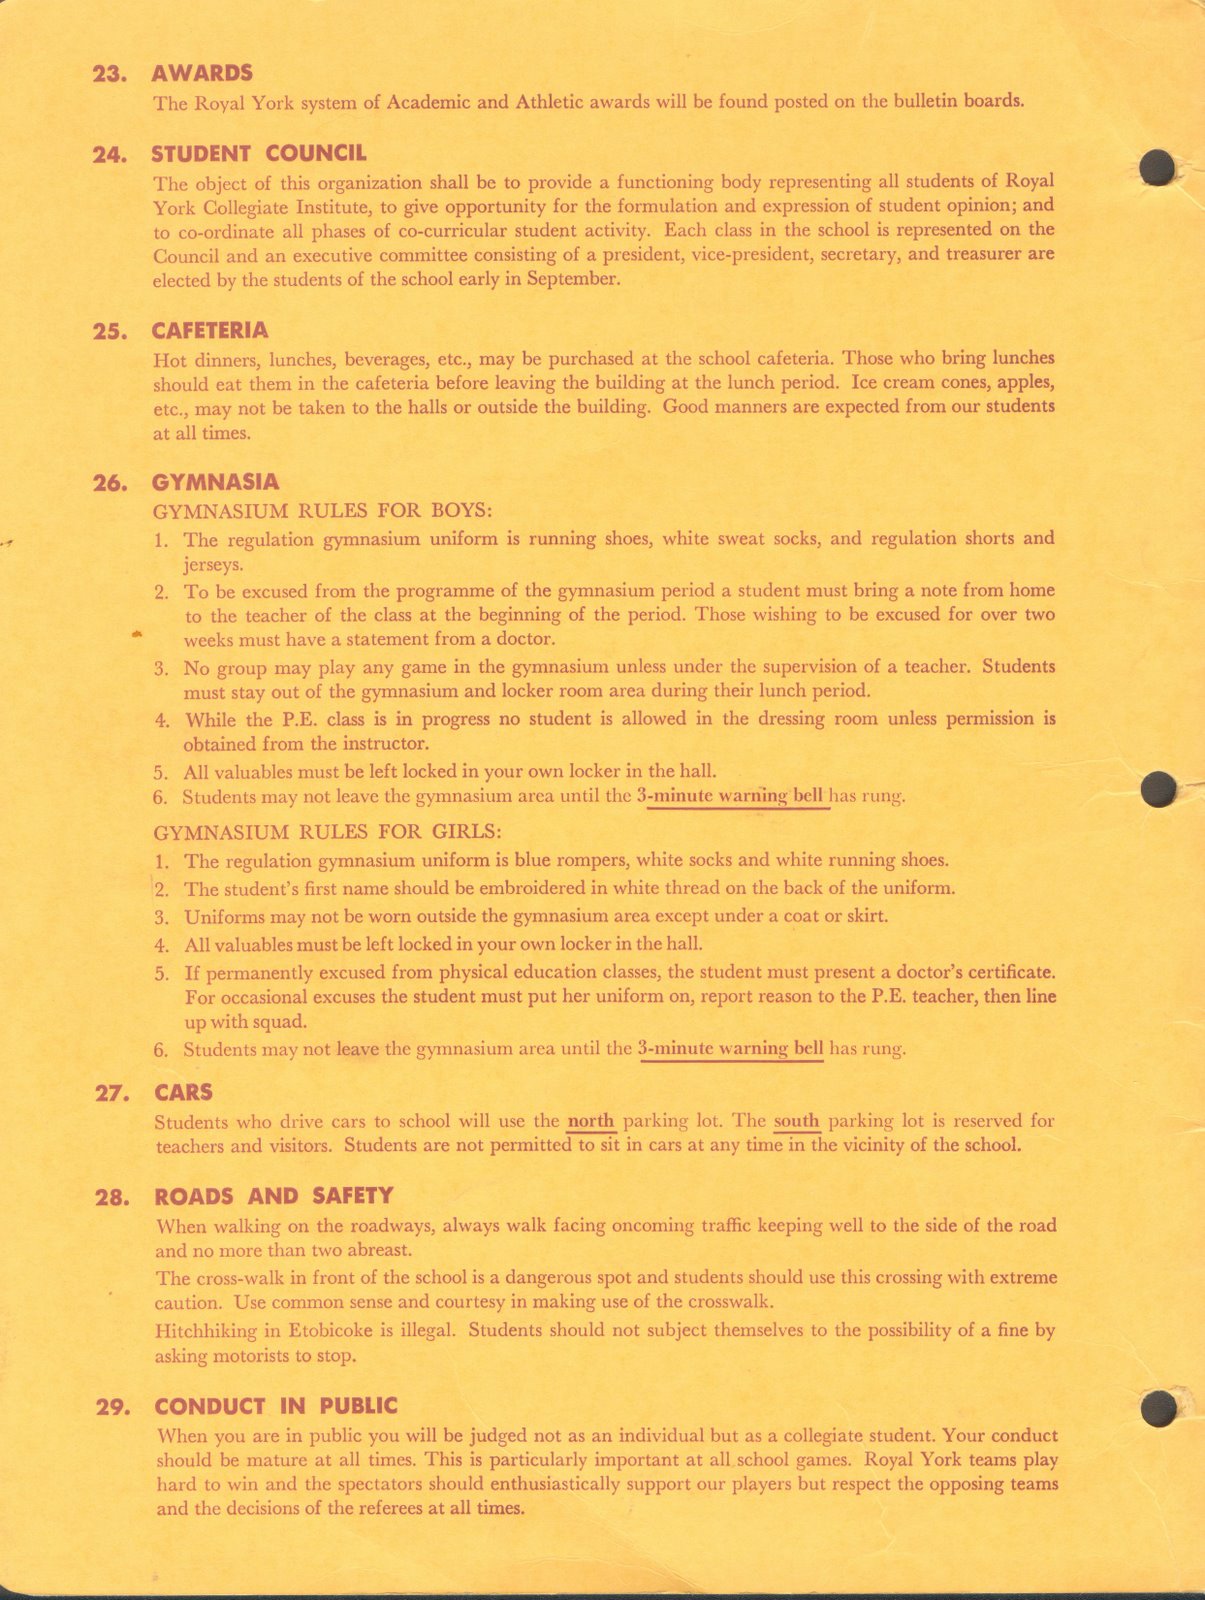 Documents related to RYCI: General Instructions for Students of RYCI, p. 2